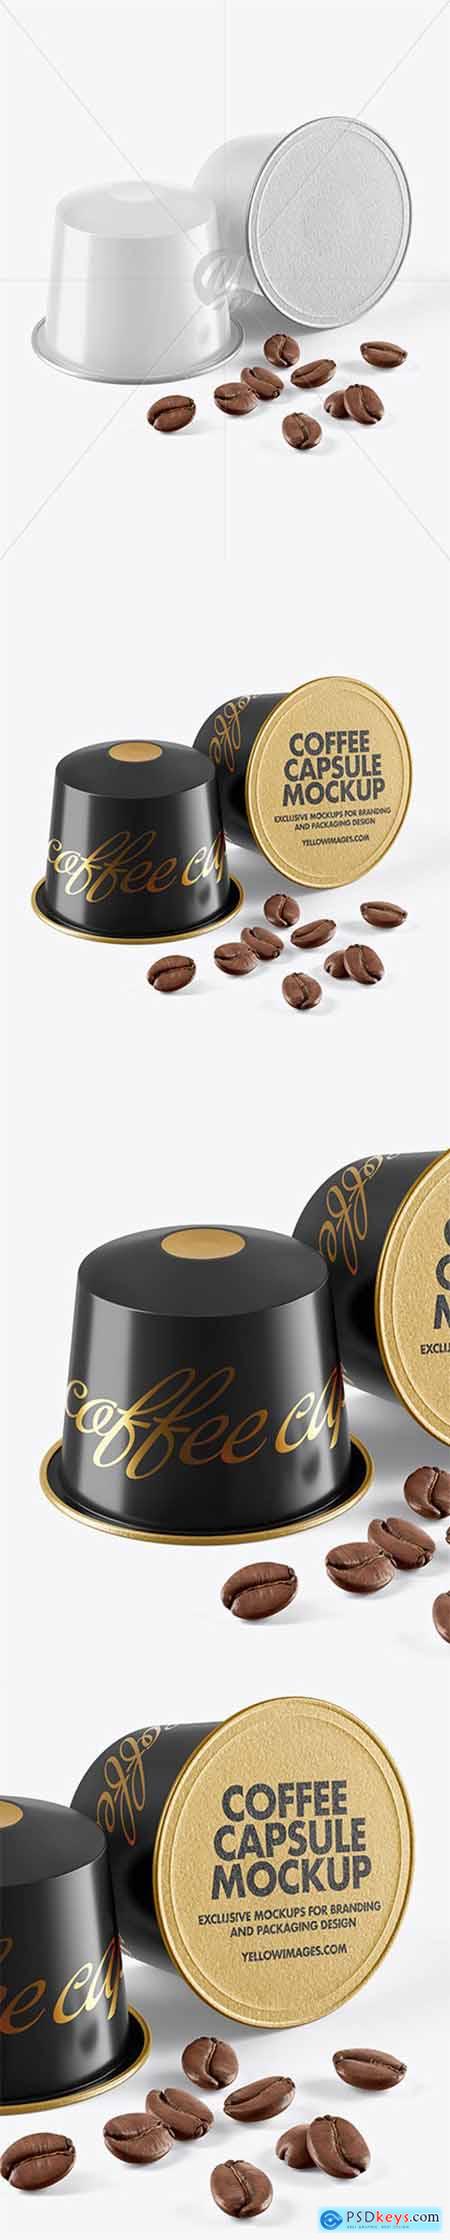 Download Two Coffee Capsules With Coffee Beans Mockup 59443 Free Download Photoshop Vector Stock Image Via Torrent Zippyshare From Psdkeys Com